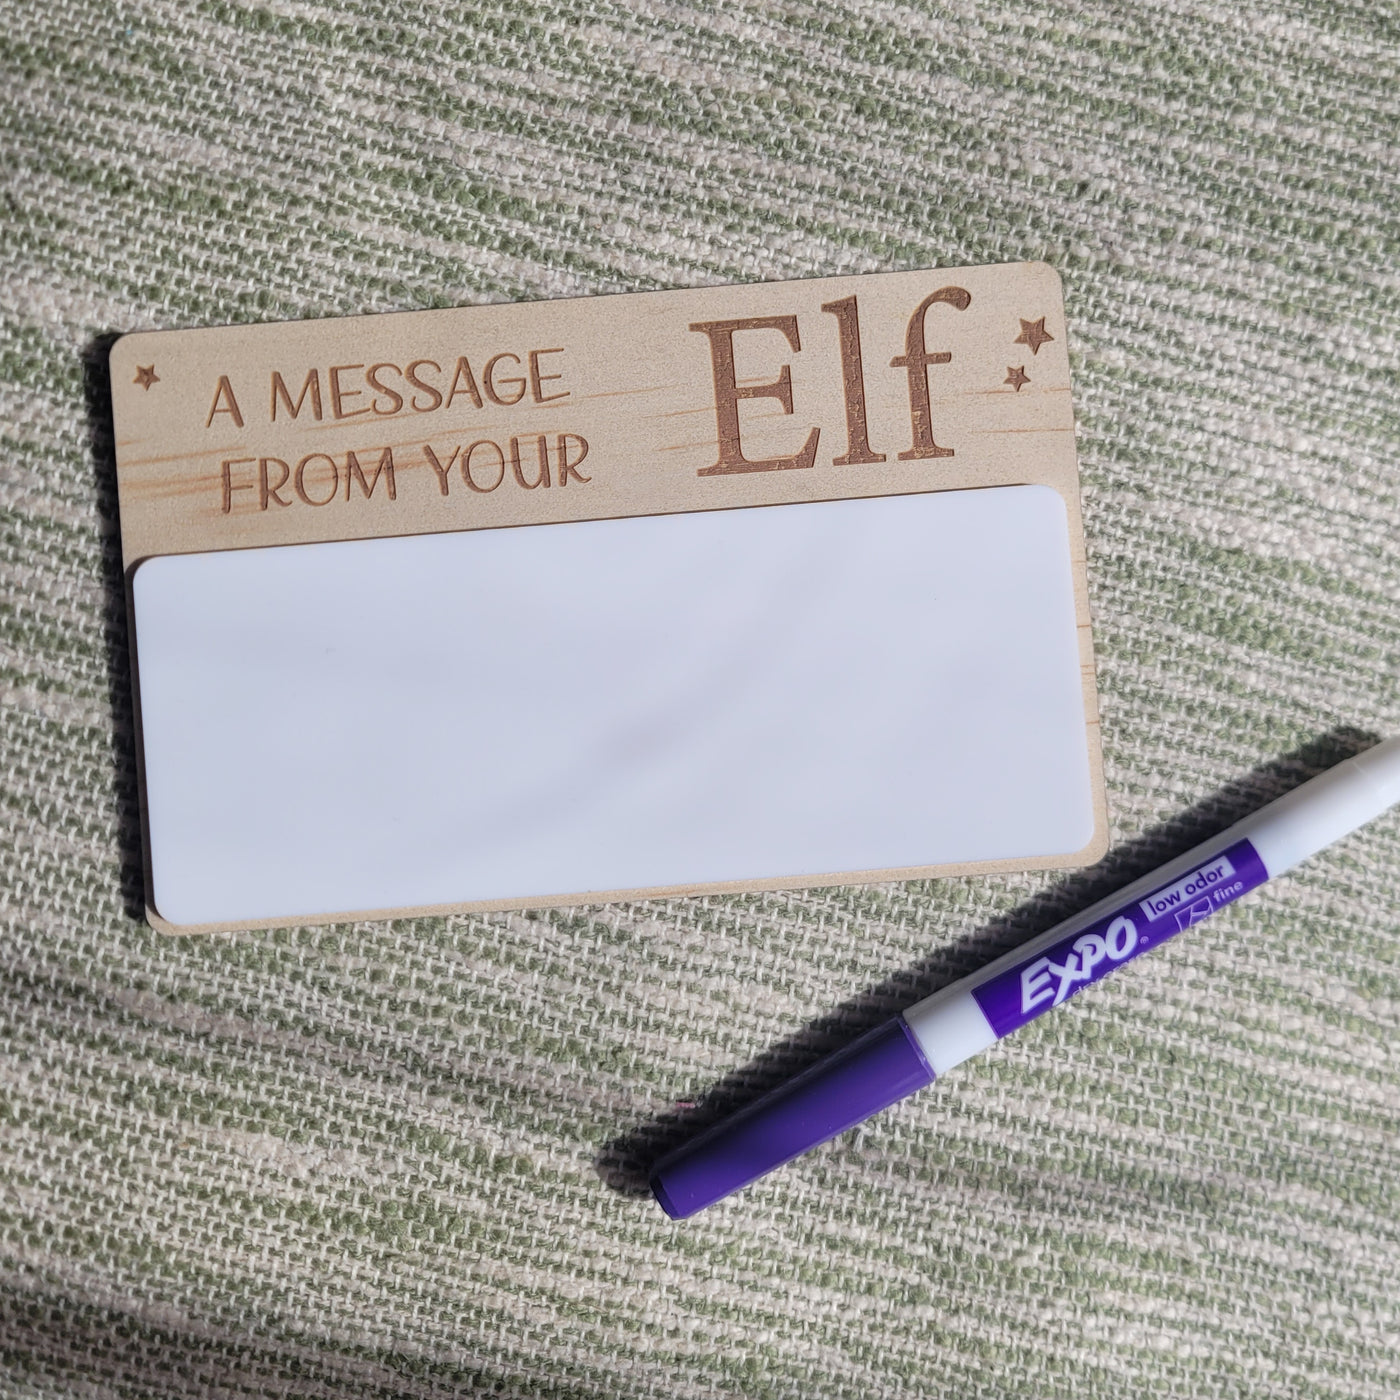 Elf on the shelf - A message from your Elf - Note Board